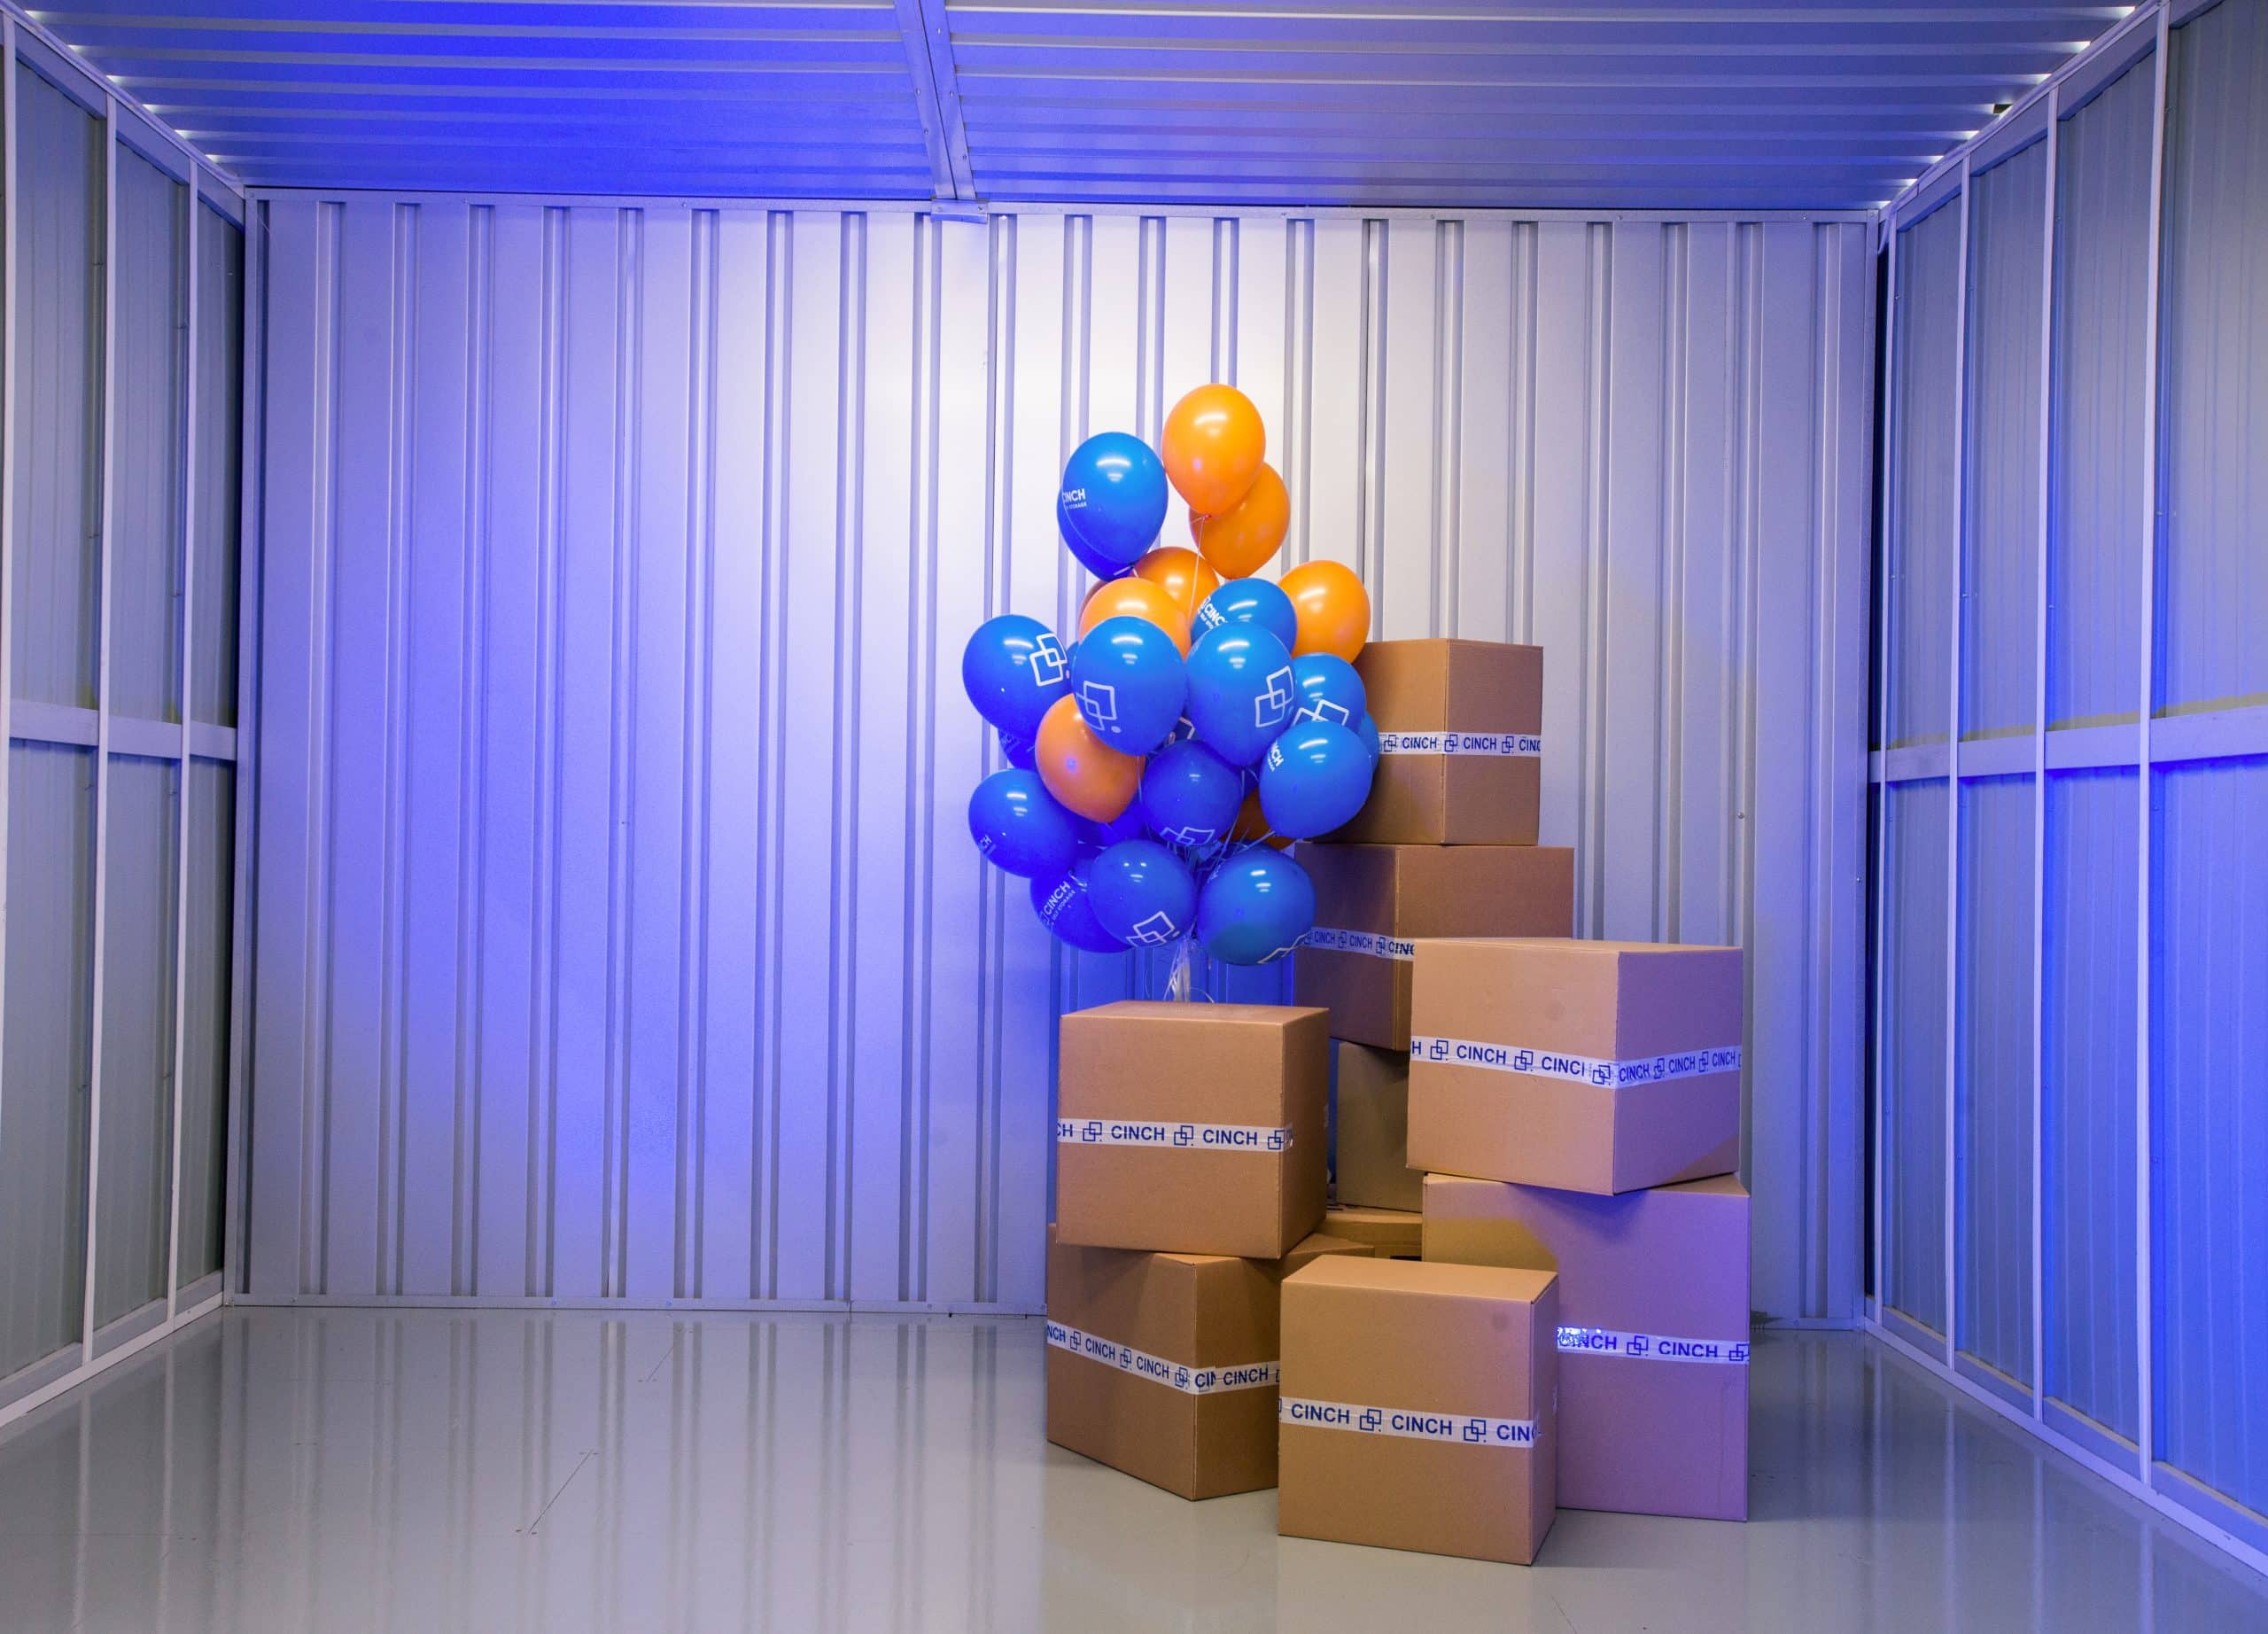 Moving to the UK? Our container storage Bicester will help - image shows the inside of a storage unit with Cinch orange and blue balloons and cardboard boxes stacked up